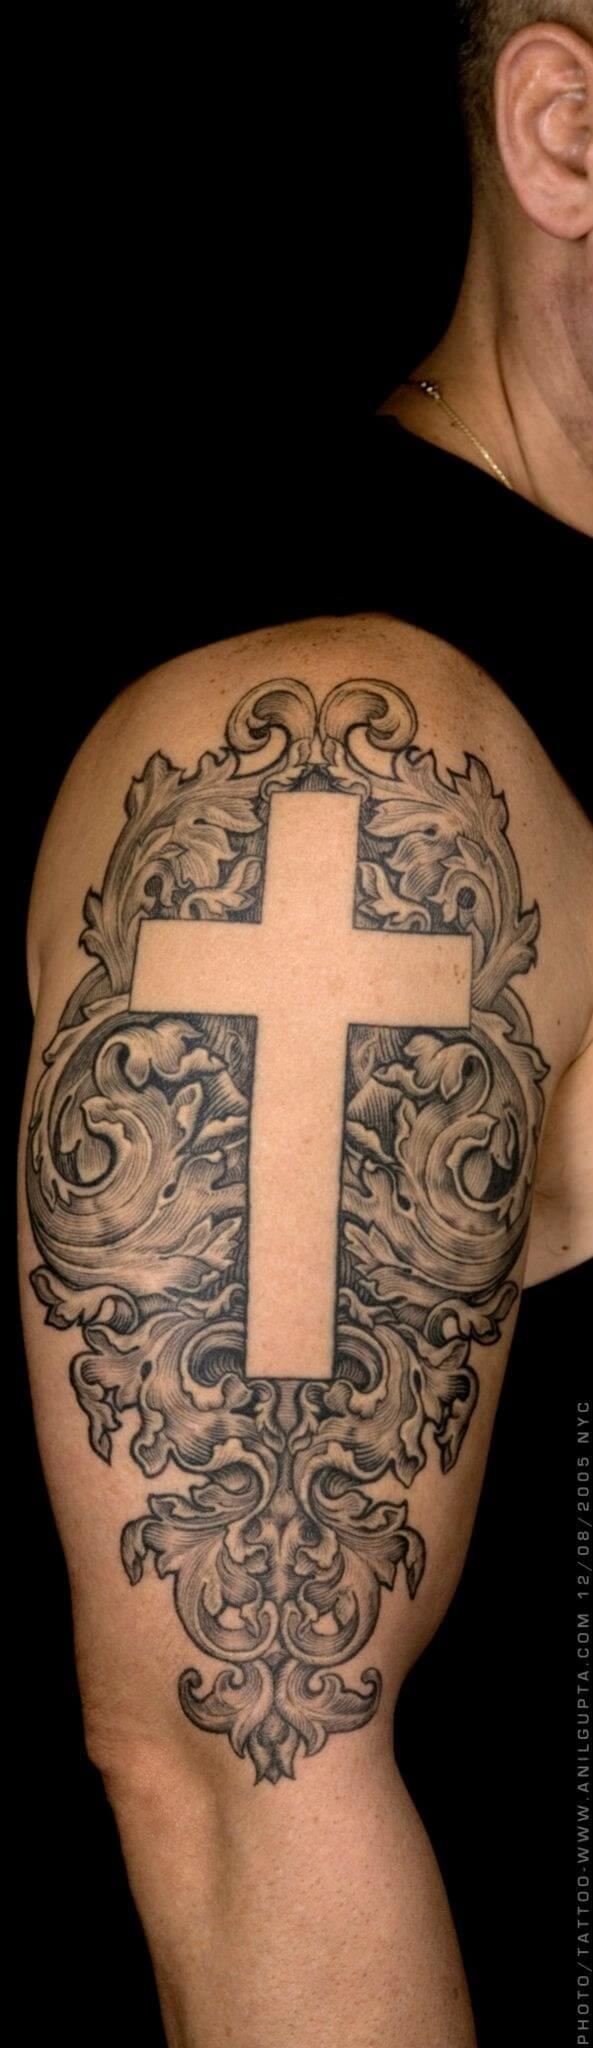 56 Best Cross Tattoos For Men Improb intended for size 593 X 2048